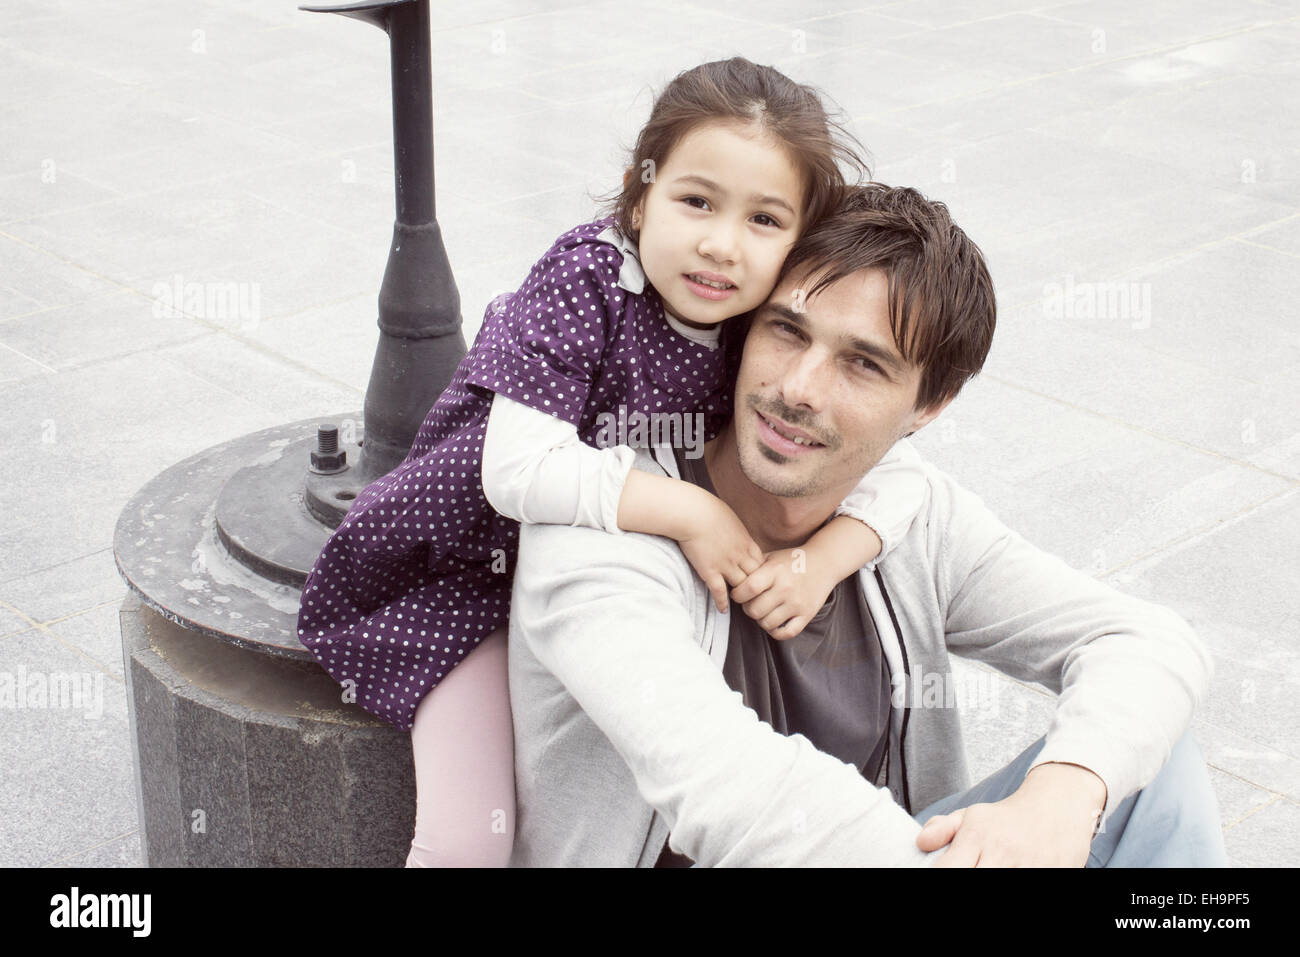 Father and daughter together outdoors, portrait Stock Photo